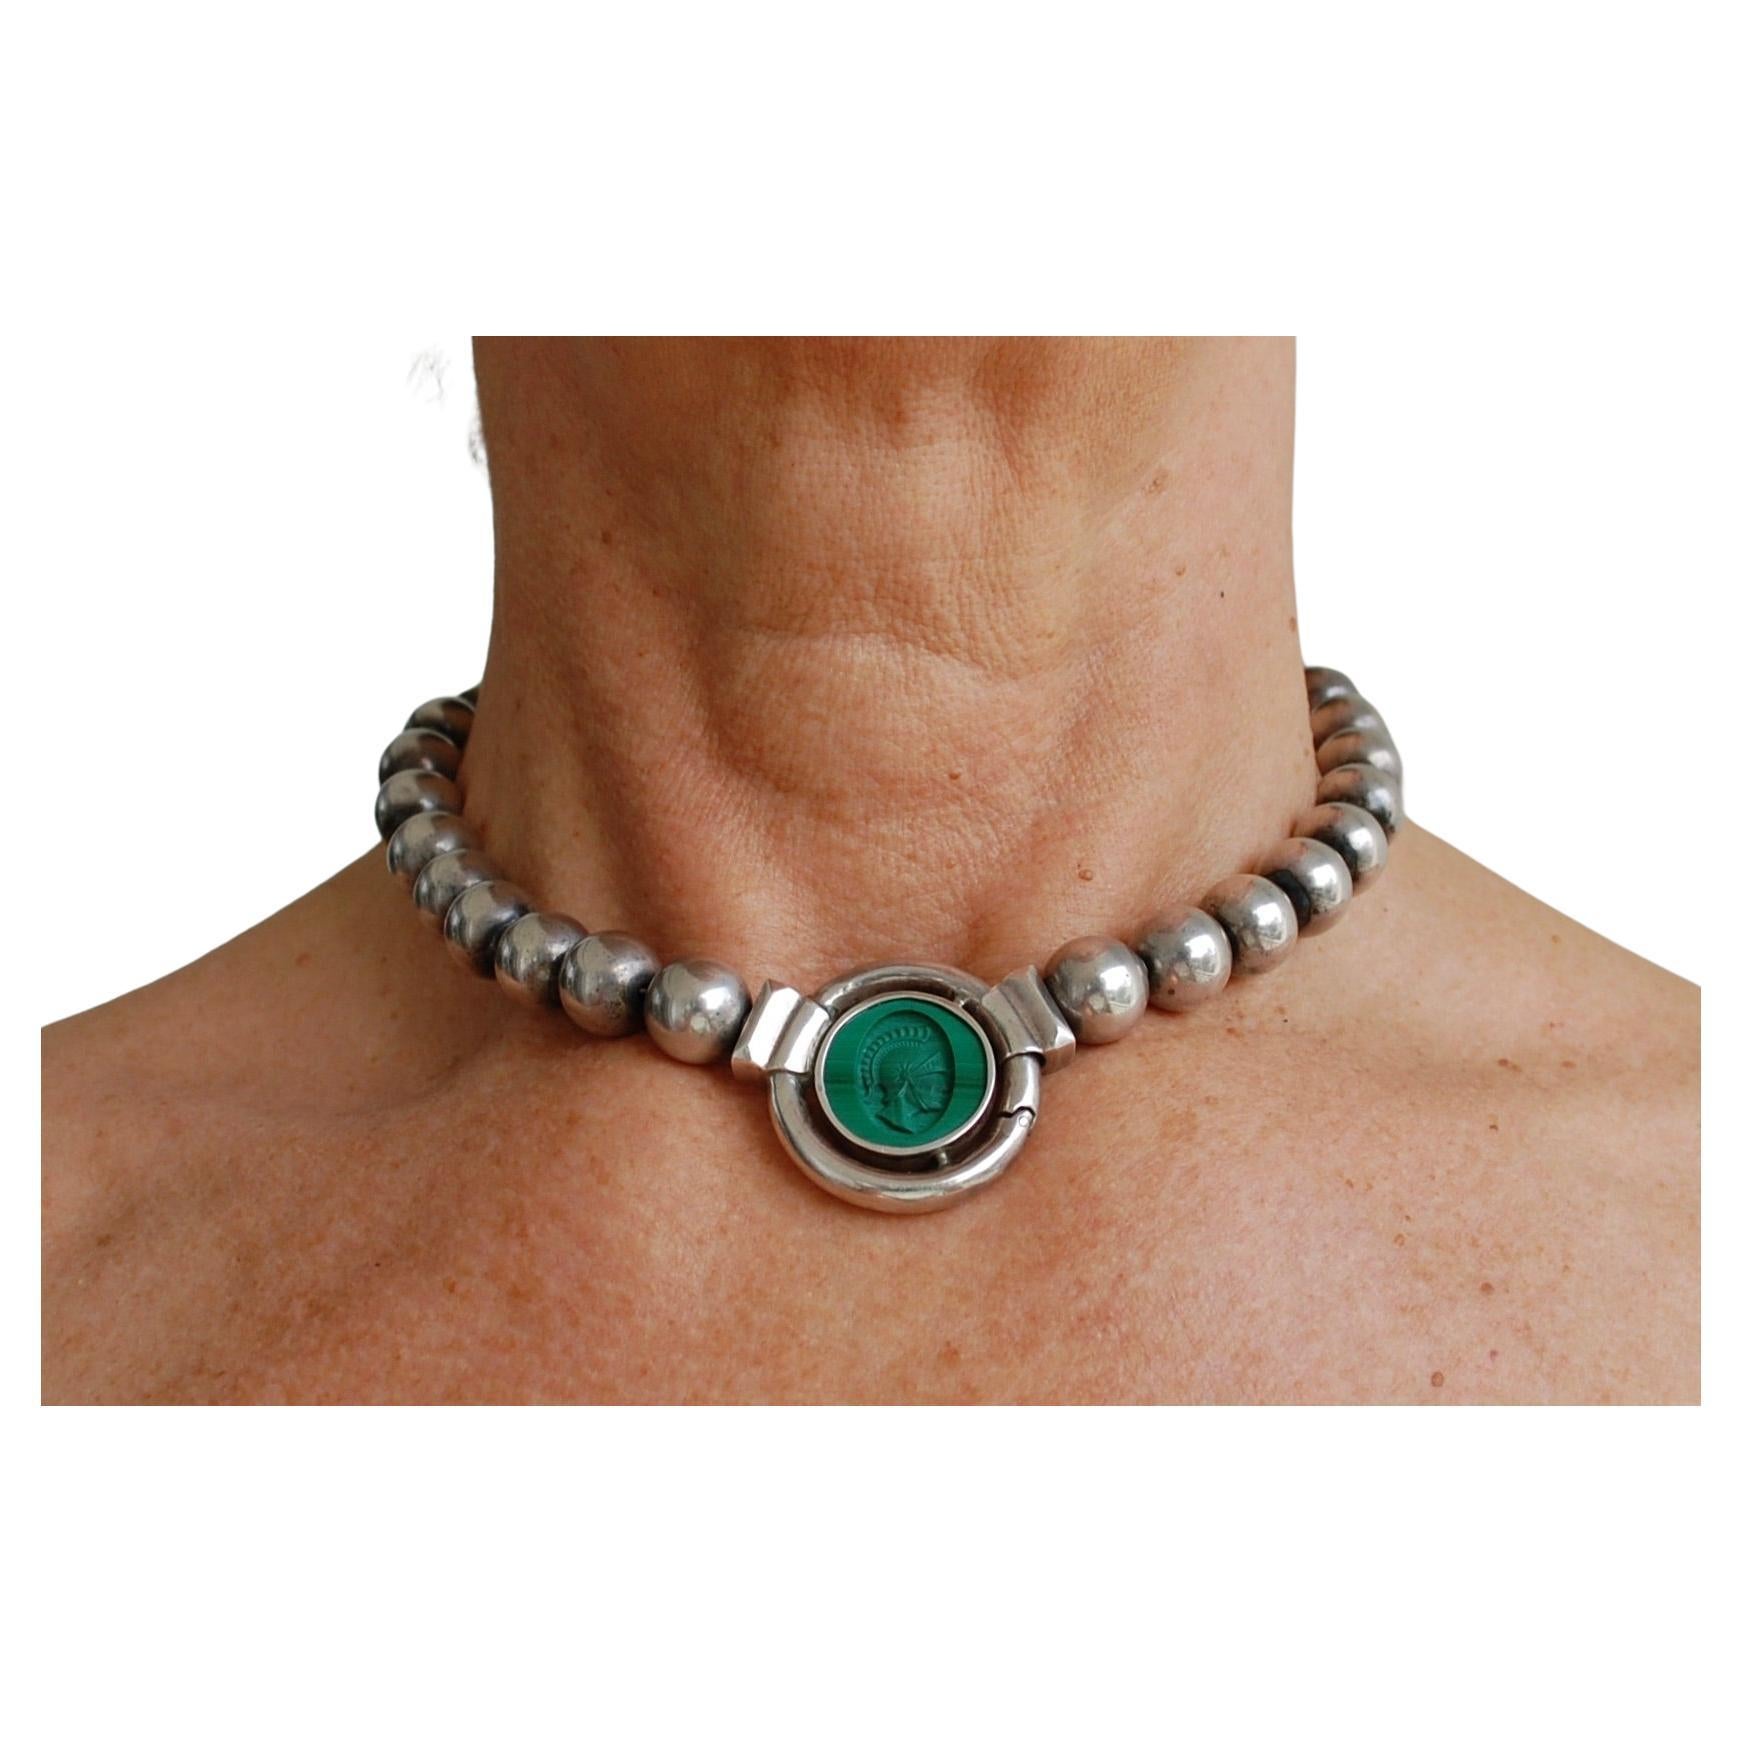 Stunning Italian Malachite and Sterling Silver choker necklace.
Vintage hand carved malachite round cameo depicting Roman soldier set in sterling silver and round beads, wonderful quality, no visible markings. About 16,5 inches, pendant 1,25 inch